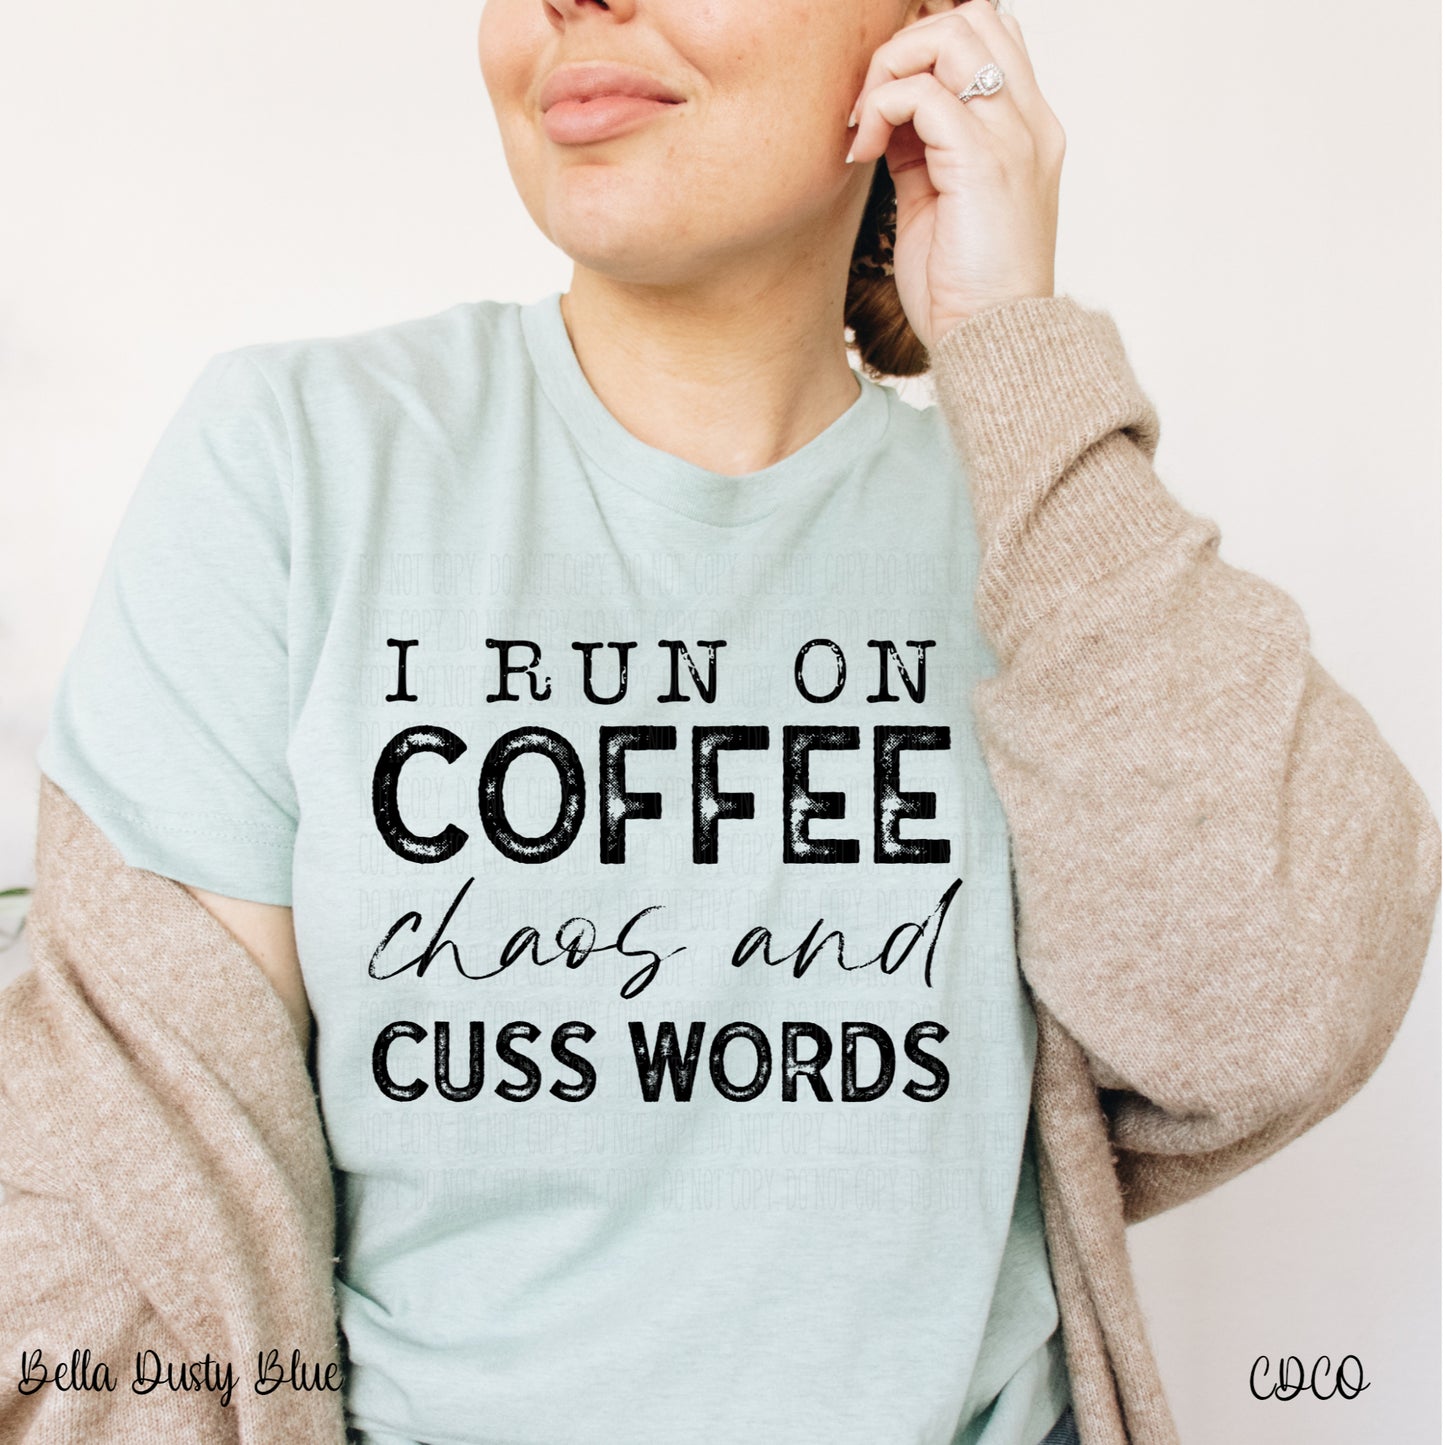 I Run on Coffee Chaos and Cuss Words (325°)